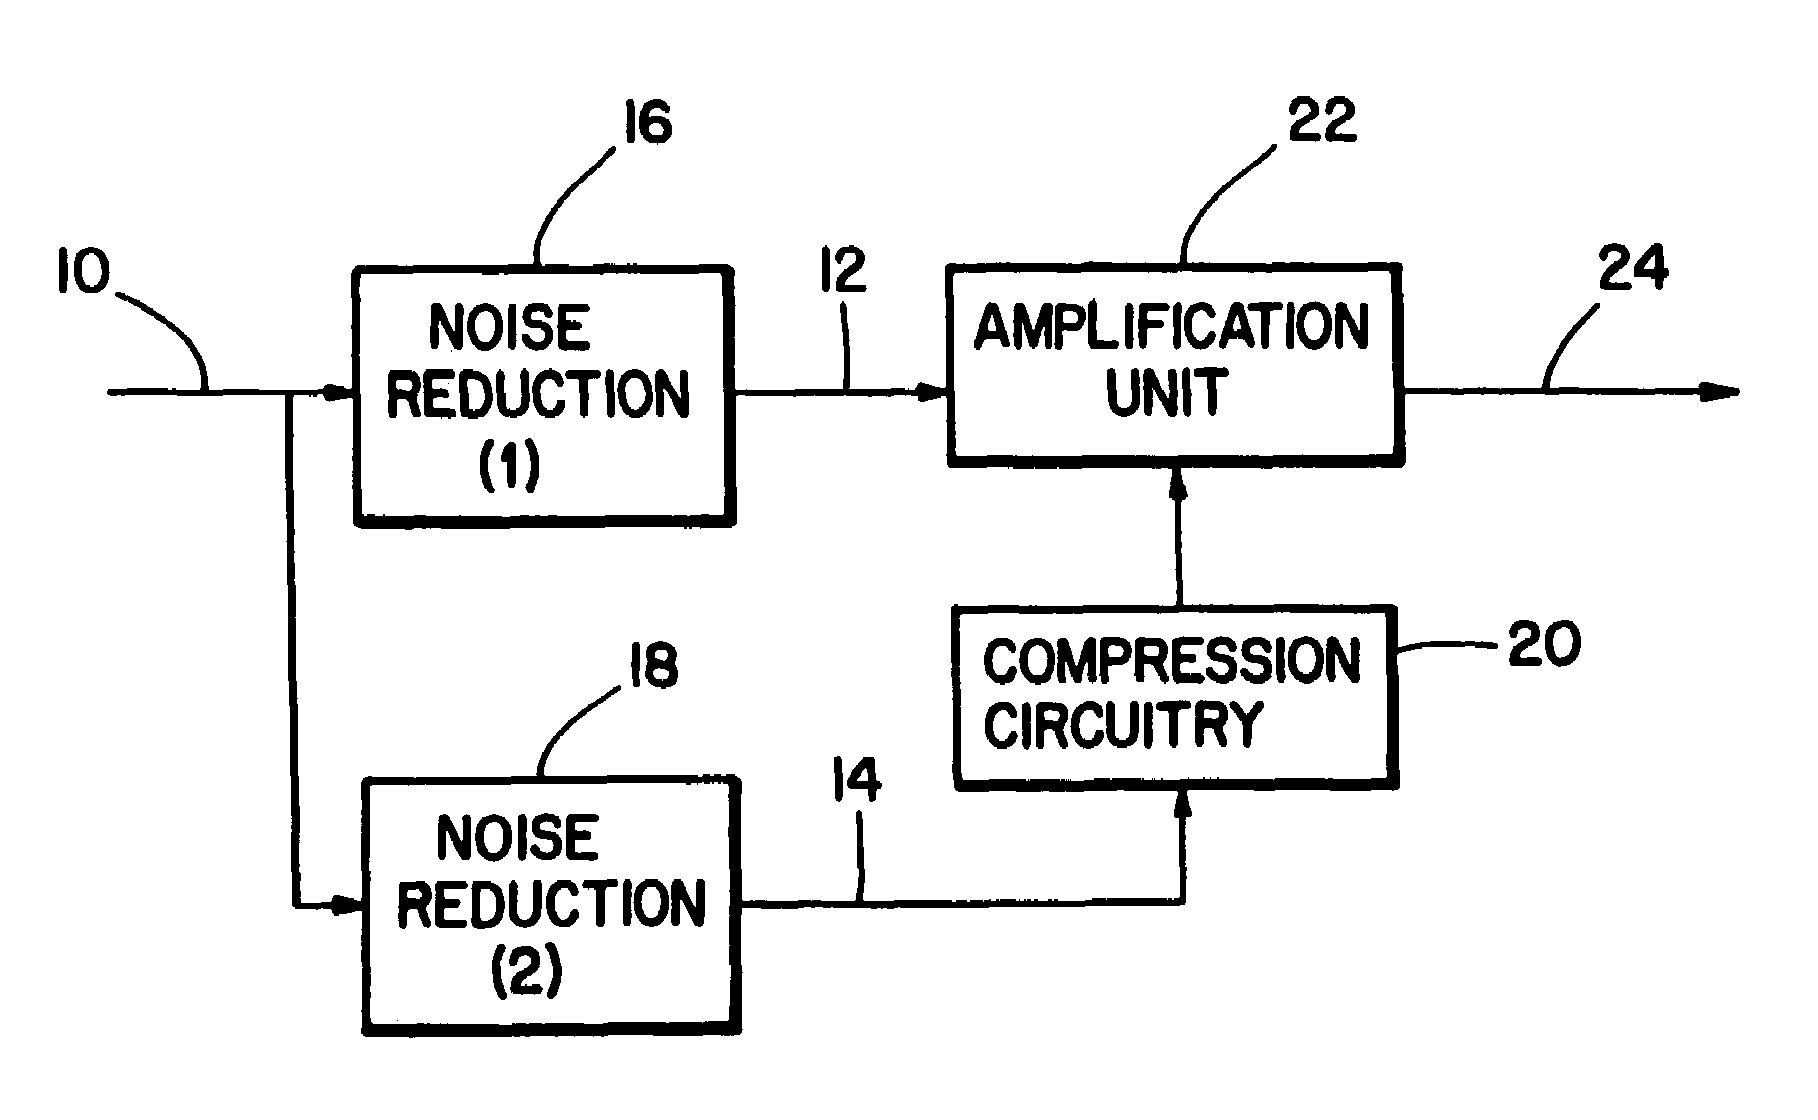 Method and apparatus for noise reduction particularly in hearing aids